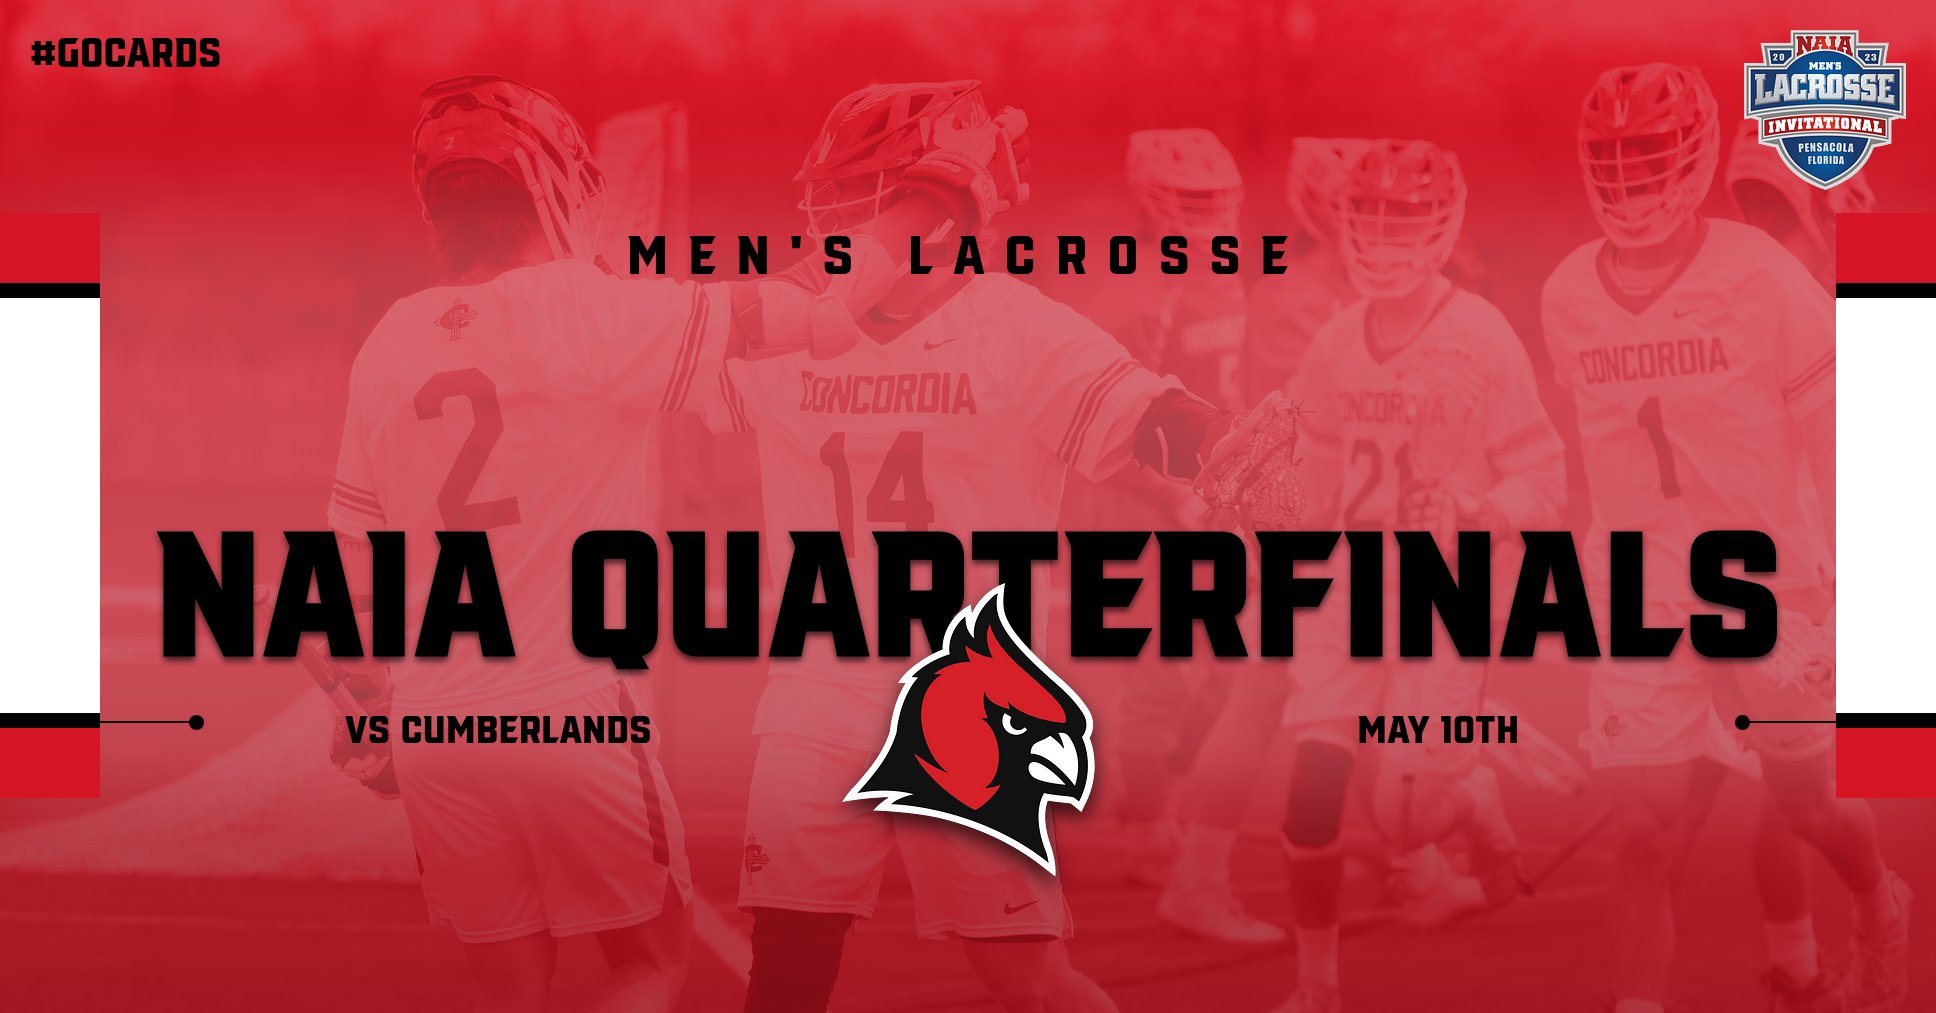 WHAC CHAMPIONSHIP PREVIEW: Men's Lacrosse to take on Indiana Tech in title game